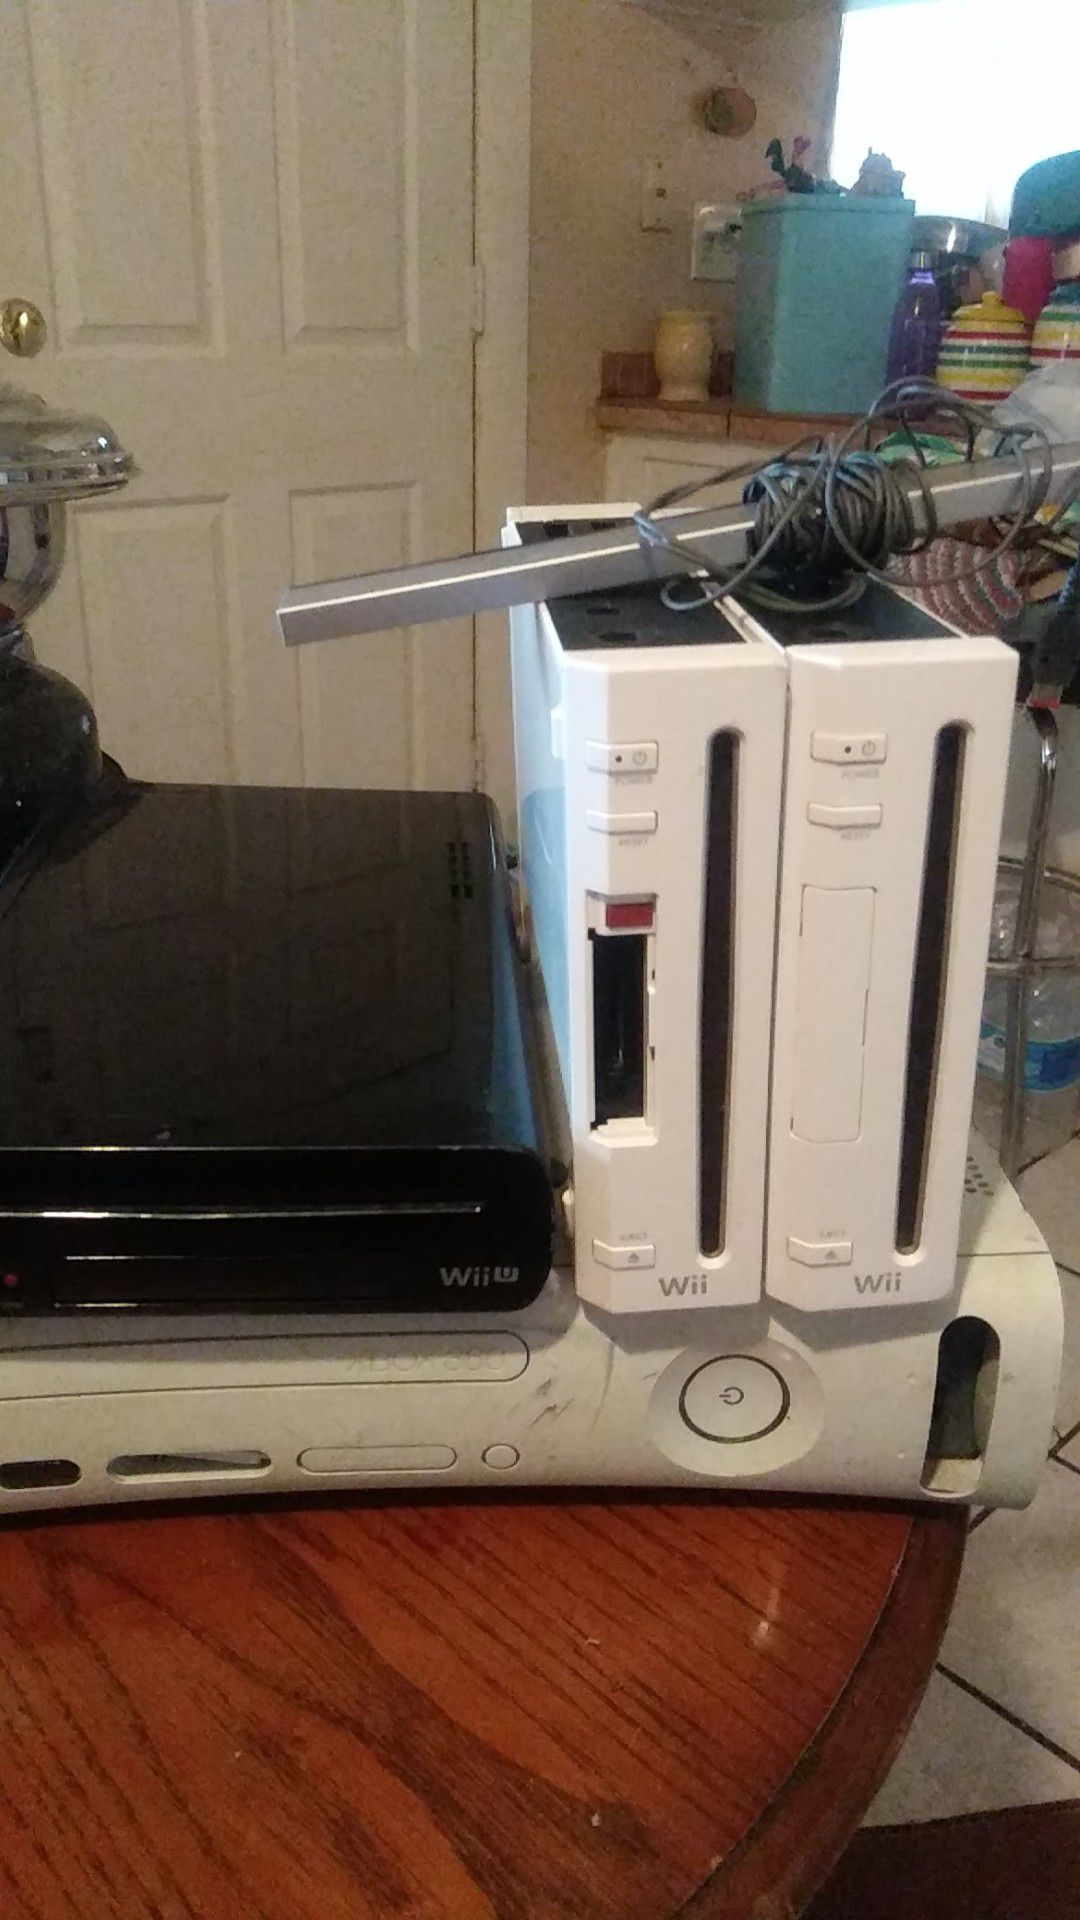 2 Nintendo Wii's,(sold wii u and Xbox)